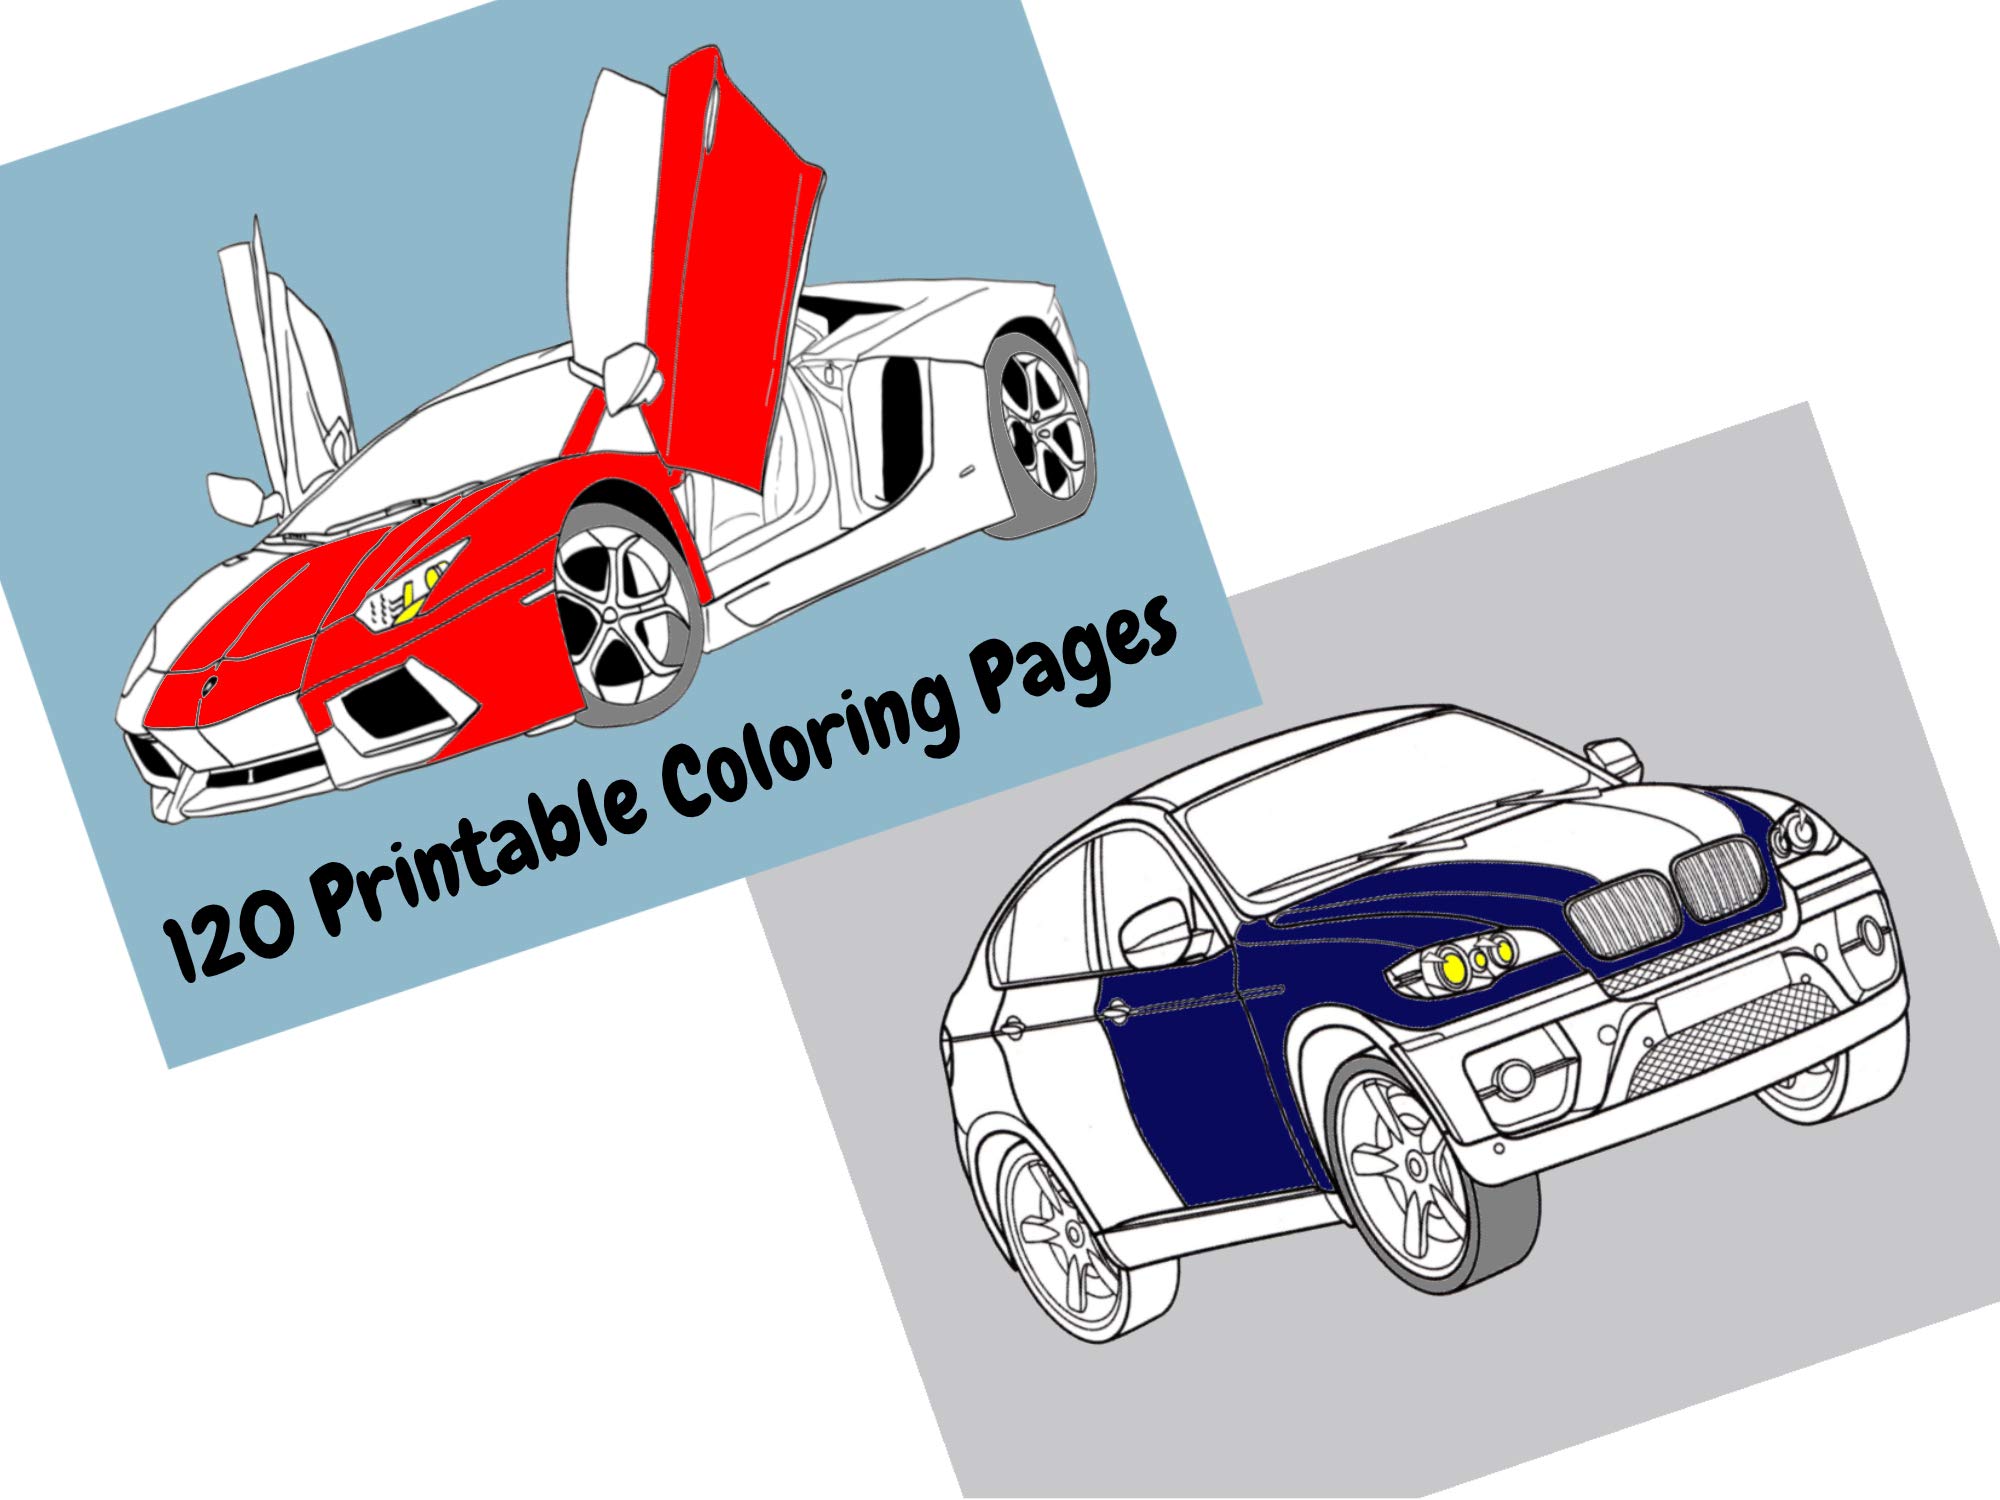 Printable coloring pages cars pdf cute easy simple colouring pages classic sports racing cars to print for kids boys girls color sheets activity at home instant download ª